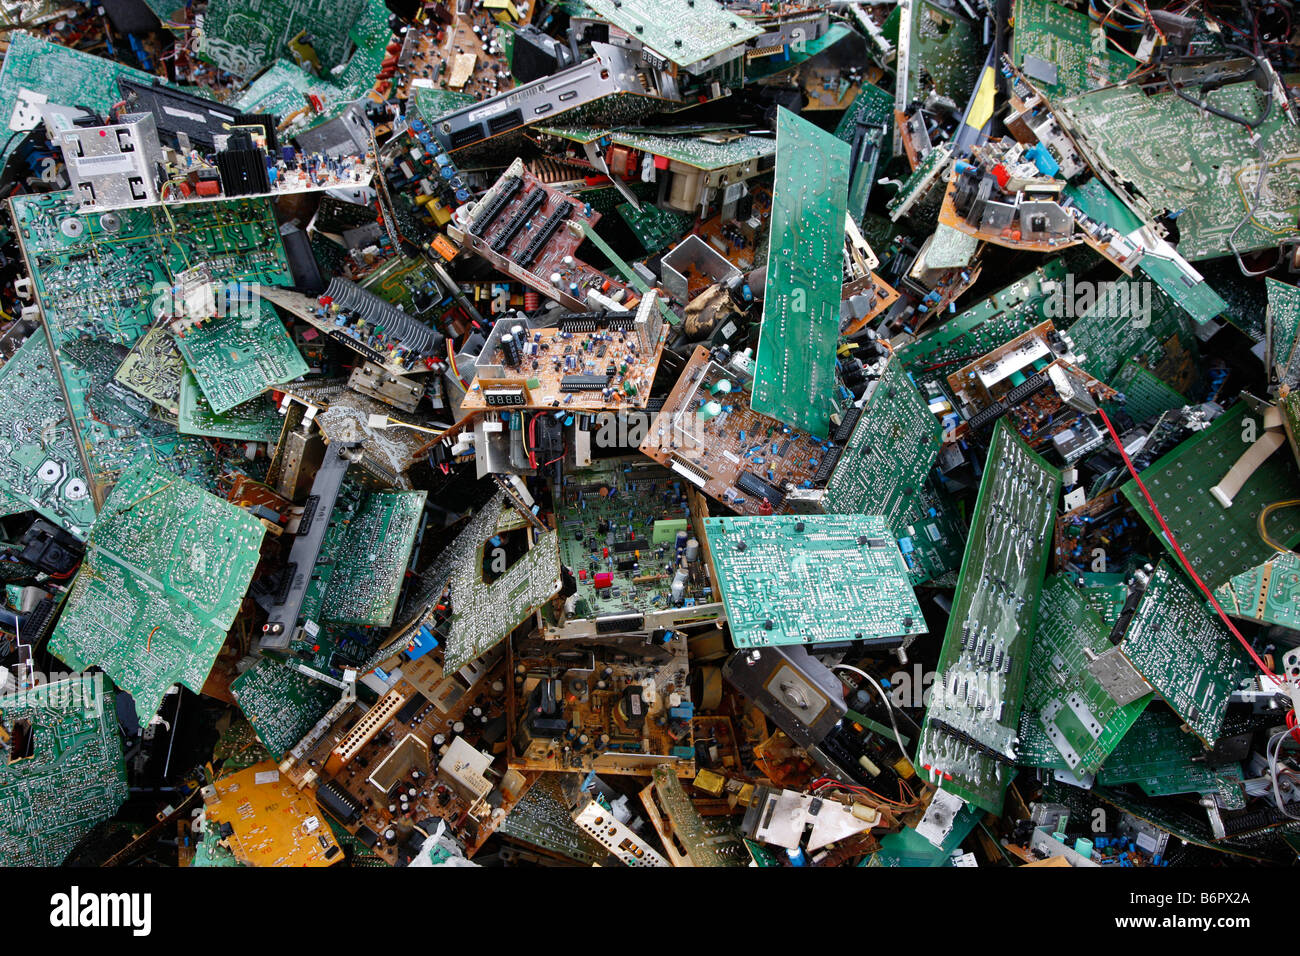 Electronic scrap, old used computer parts for recycling Stock Photo - Alamy